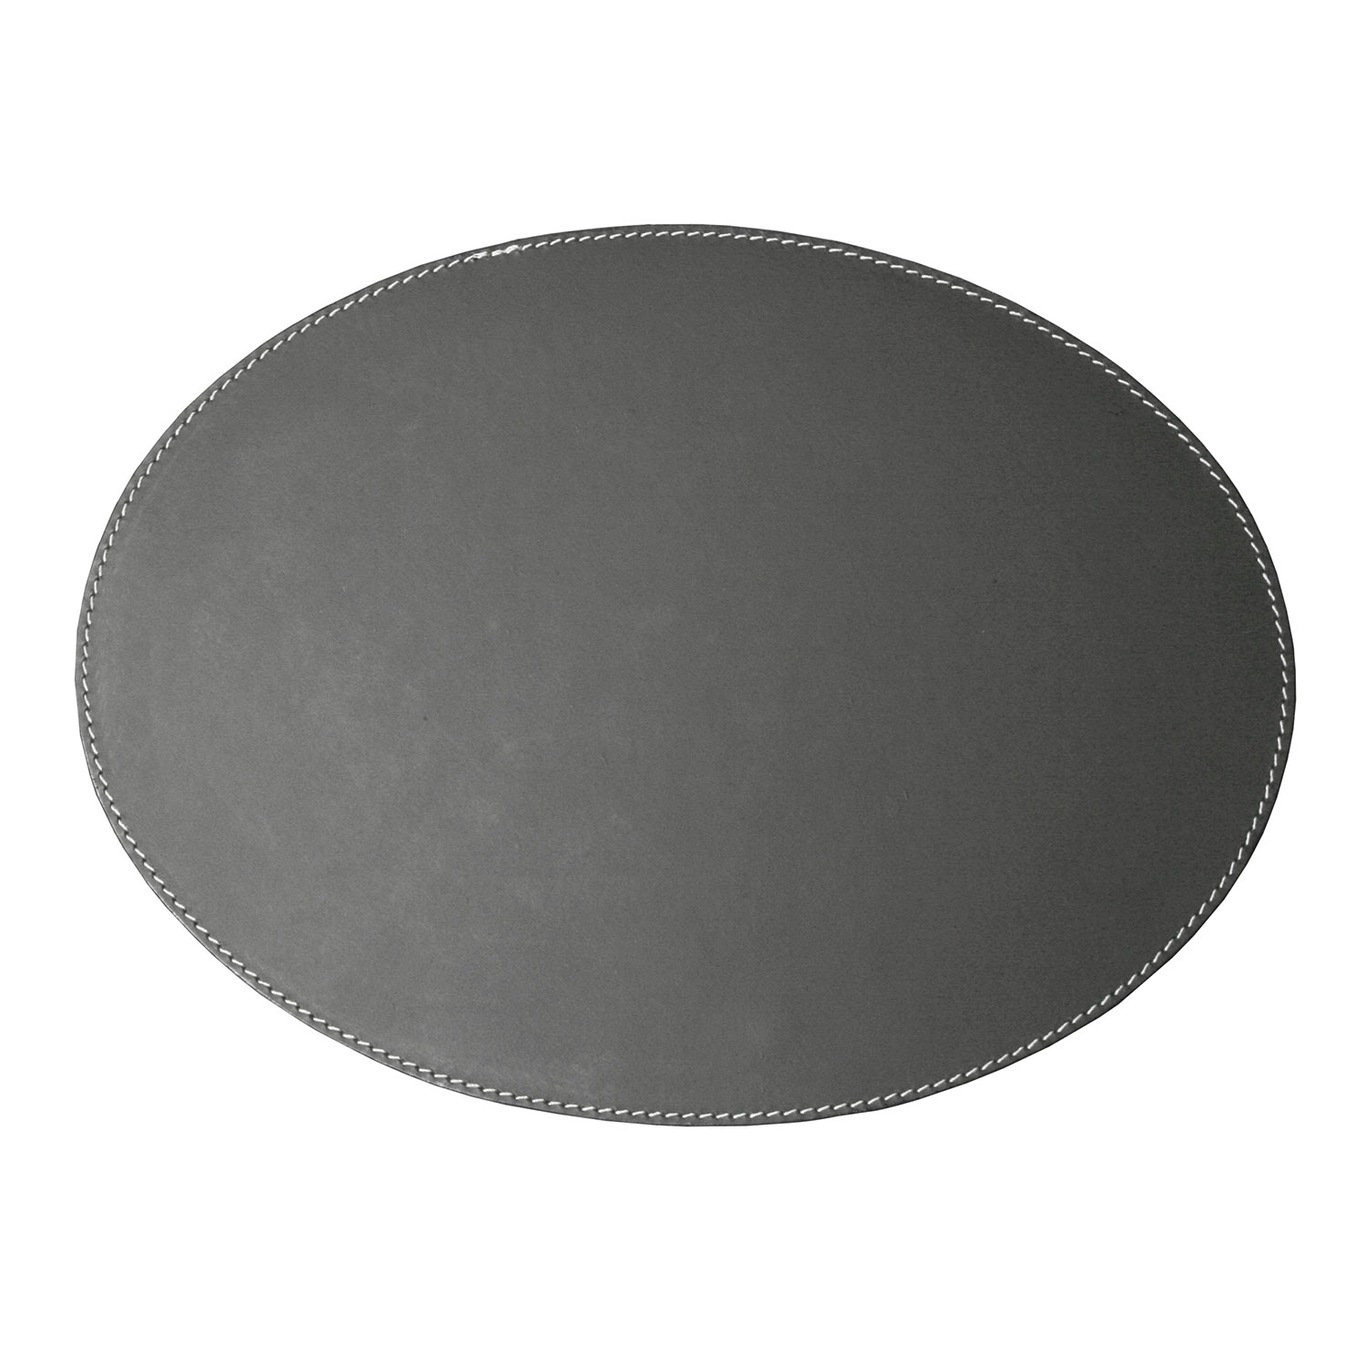 Placemat Oval 35x48cm, Grey